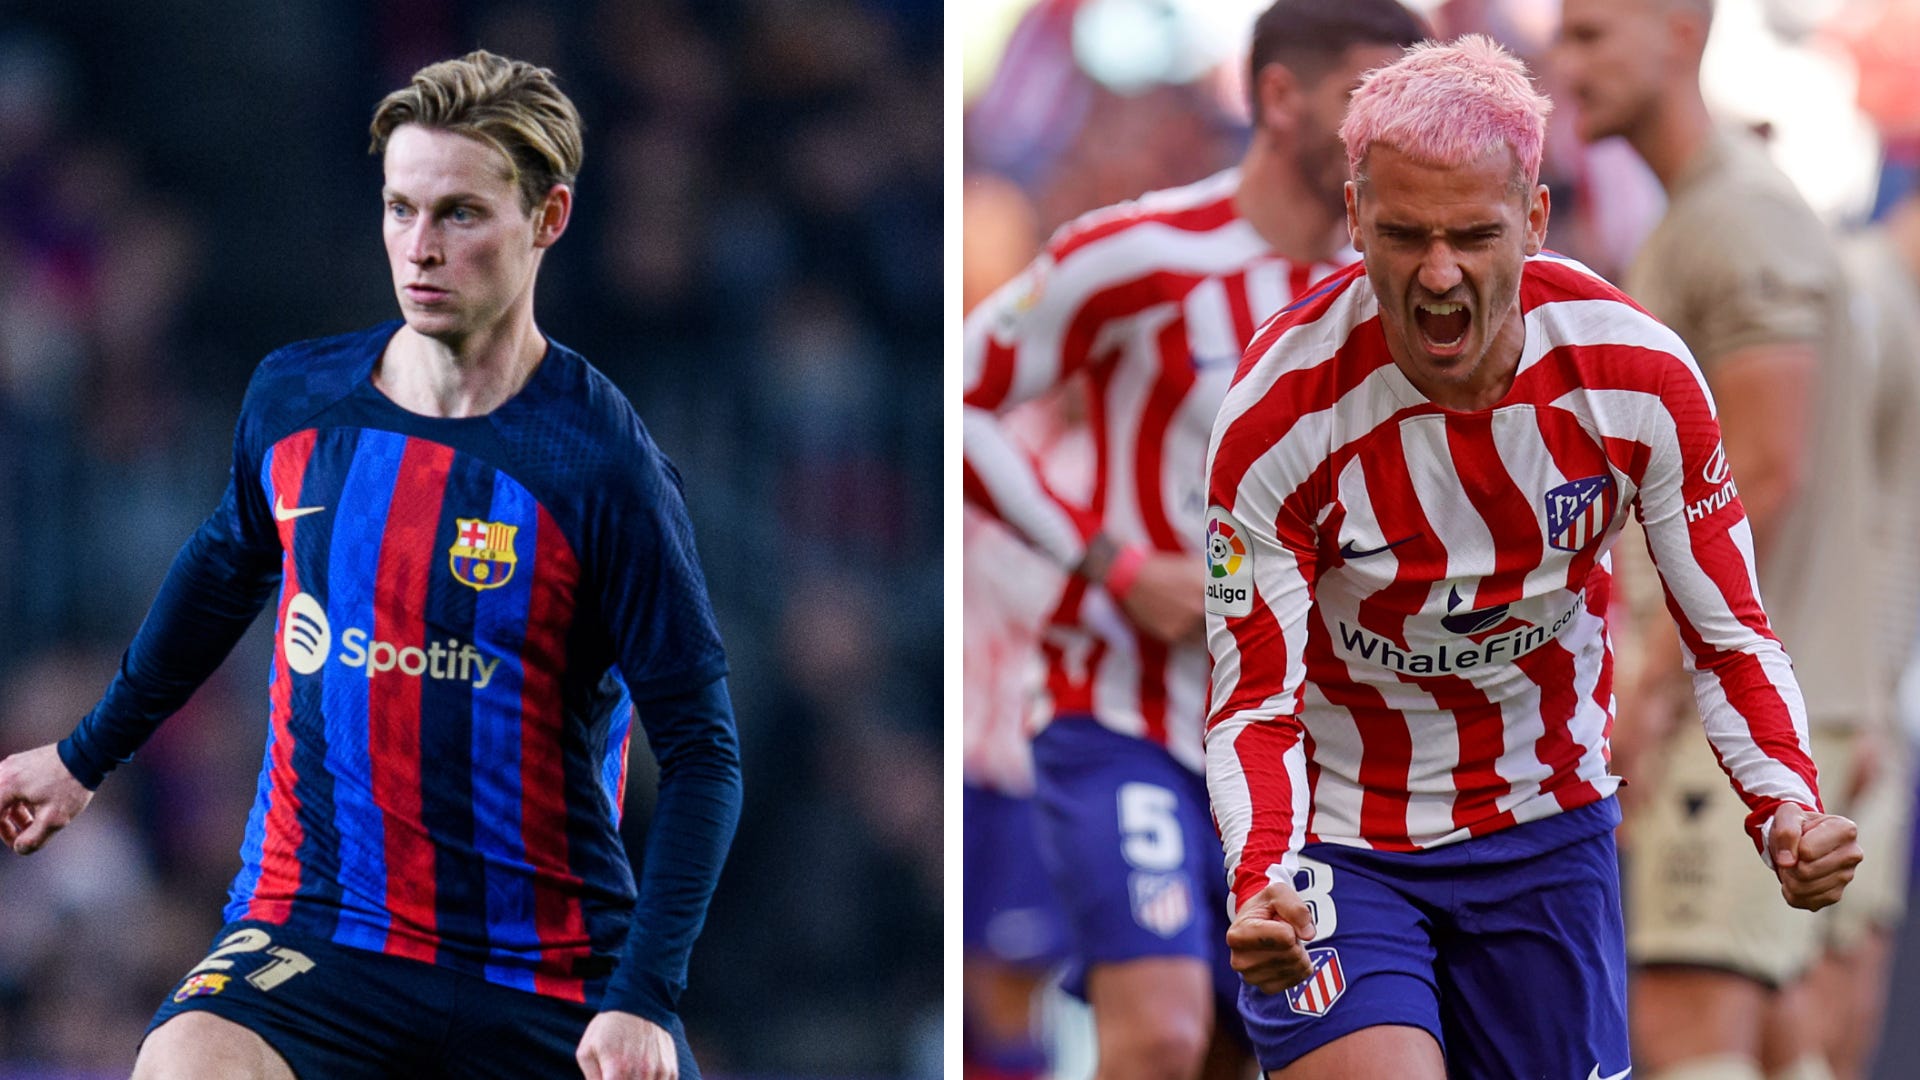 Barcelona vs Atletico Madrid Where to watch the match online, live stream, TV channels and kick-off time Goal US